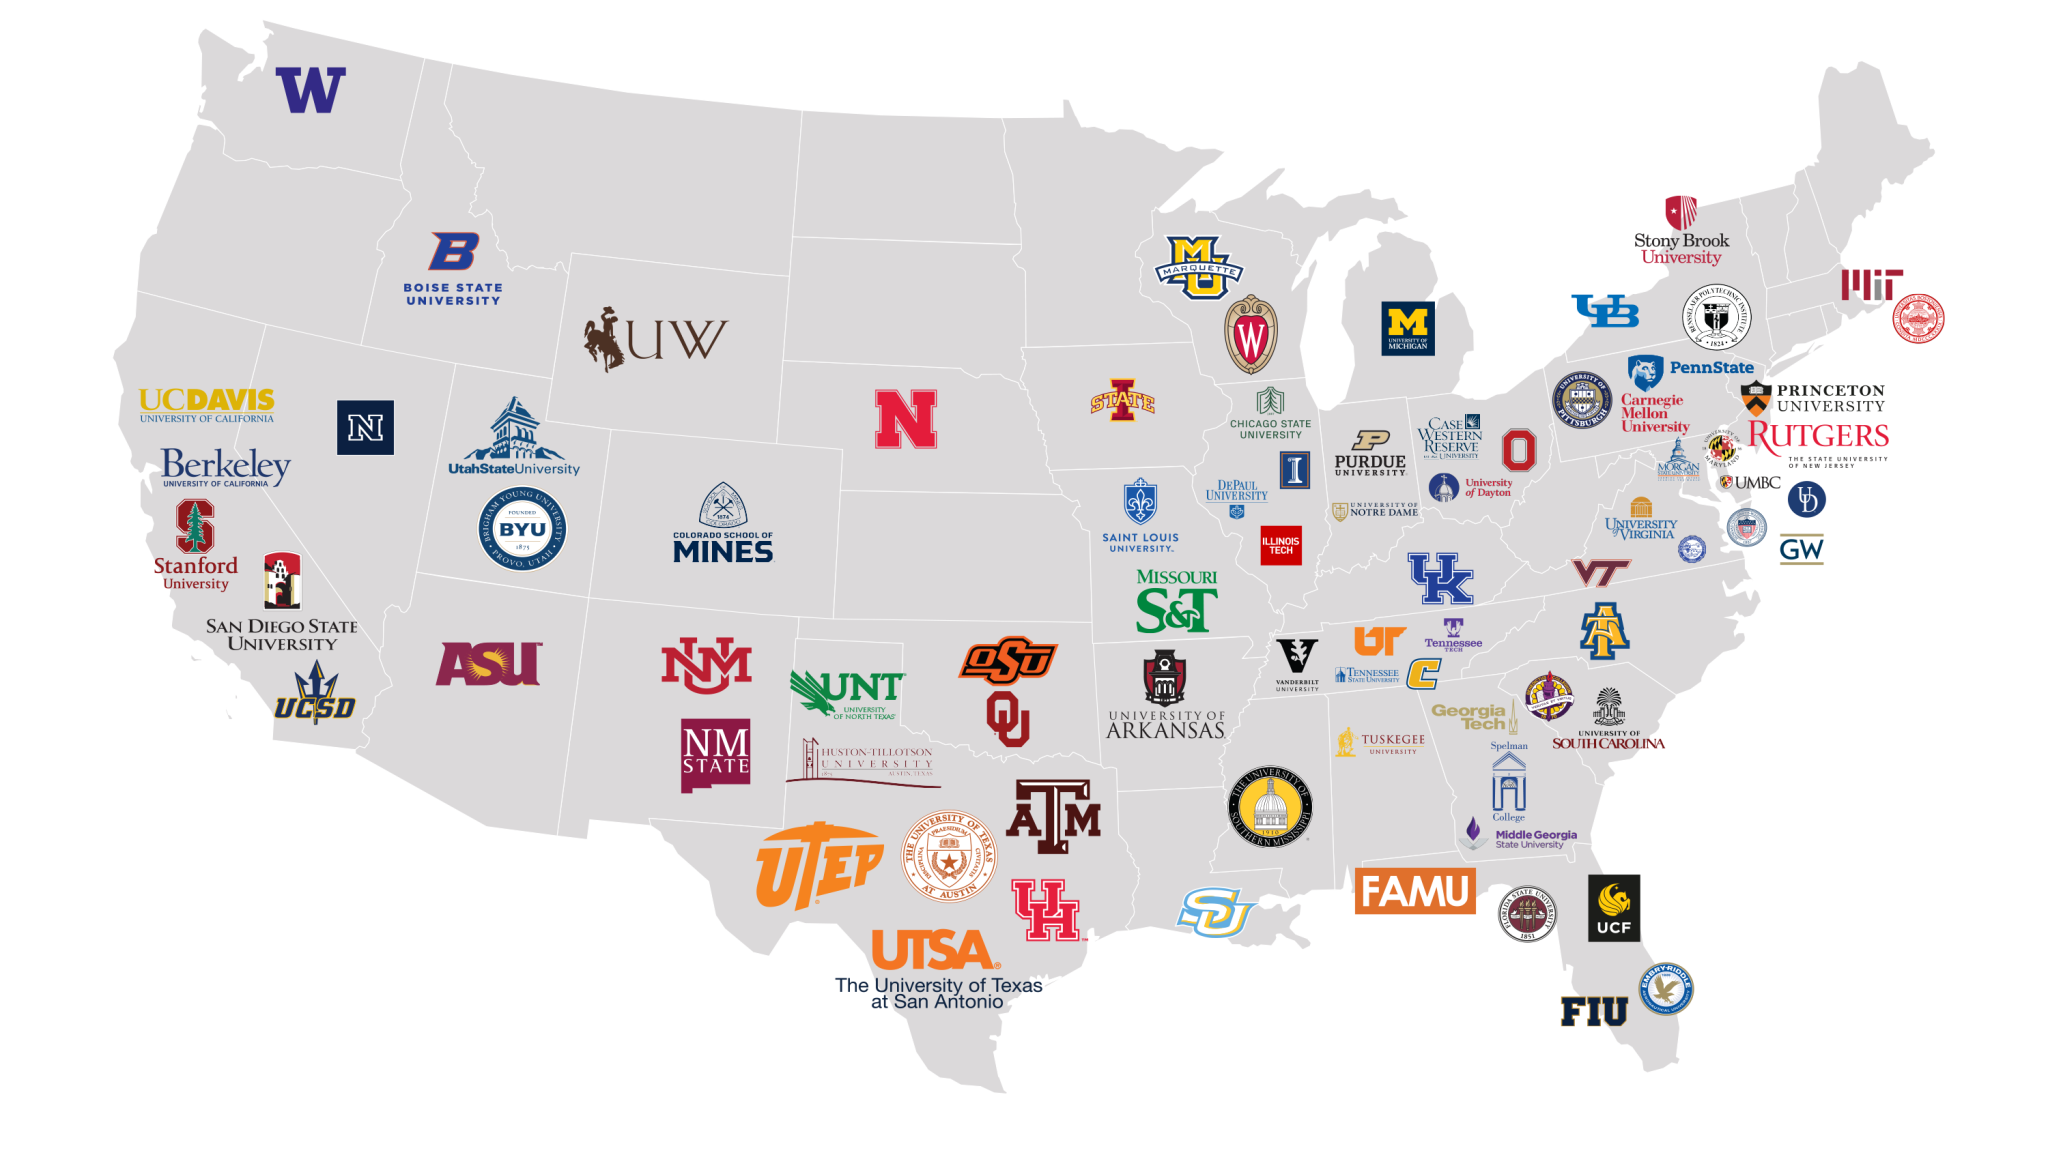 A map of the United States showing college logos.